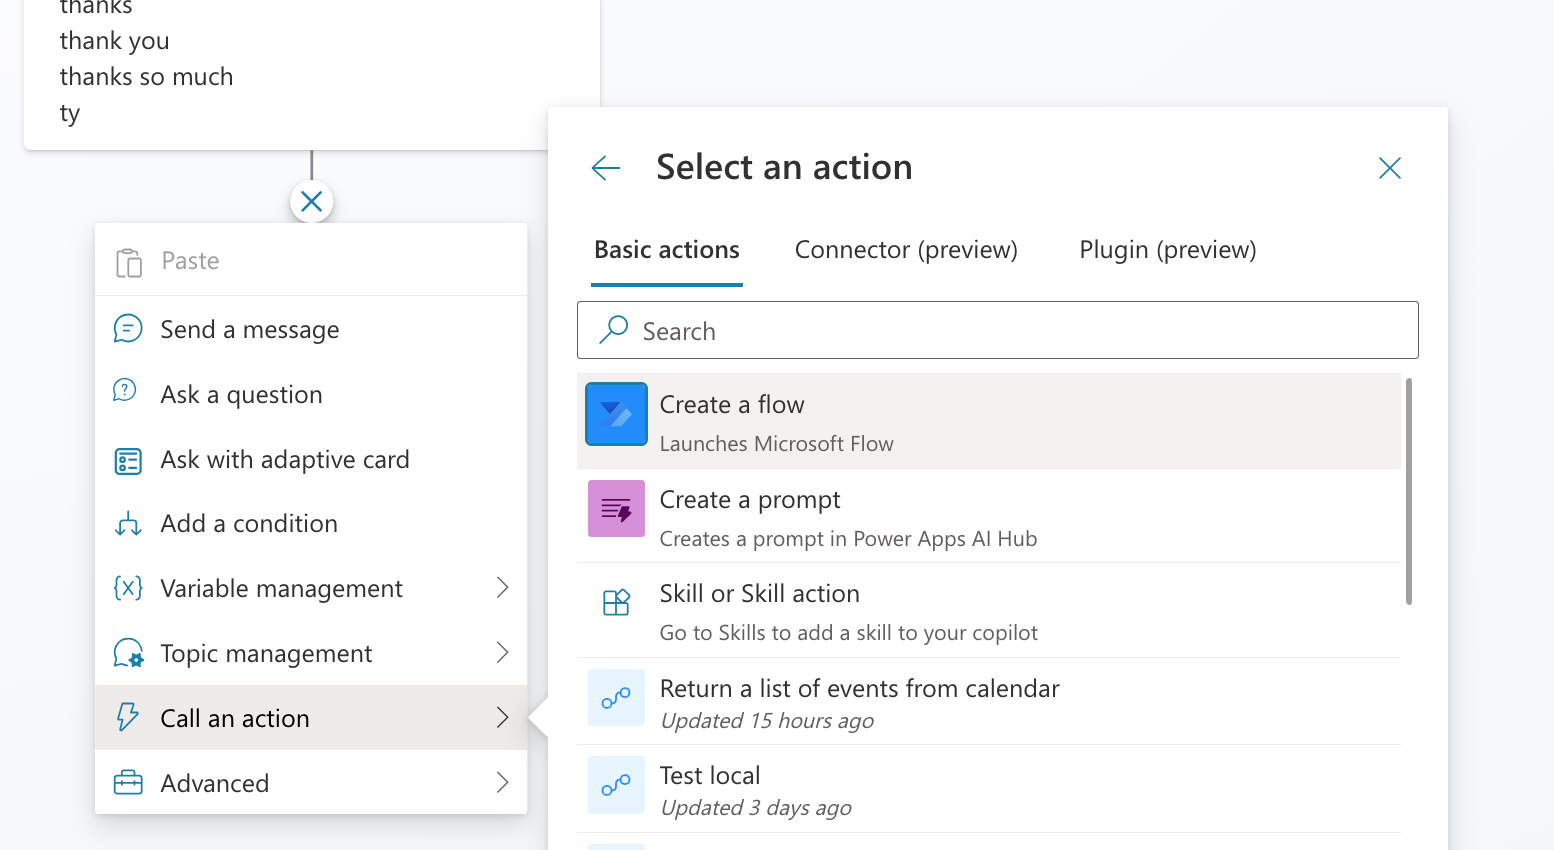 Screenshot of the Create a flow option in the Call an action menu.